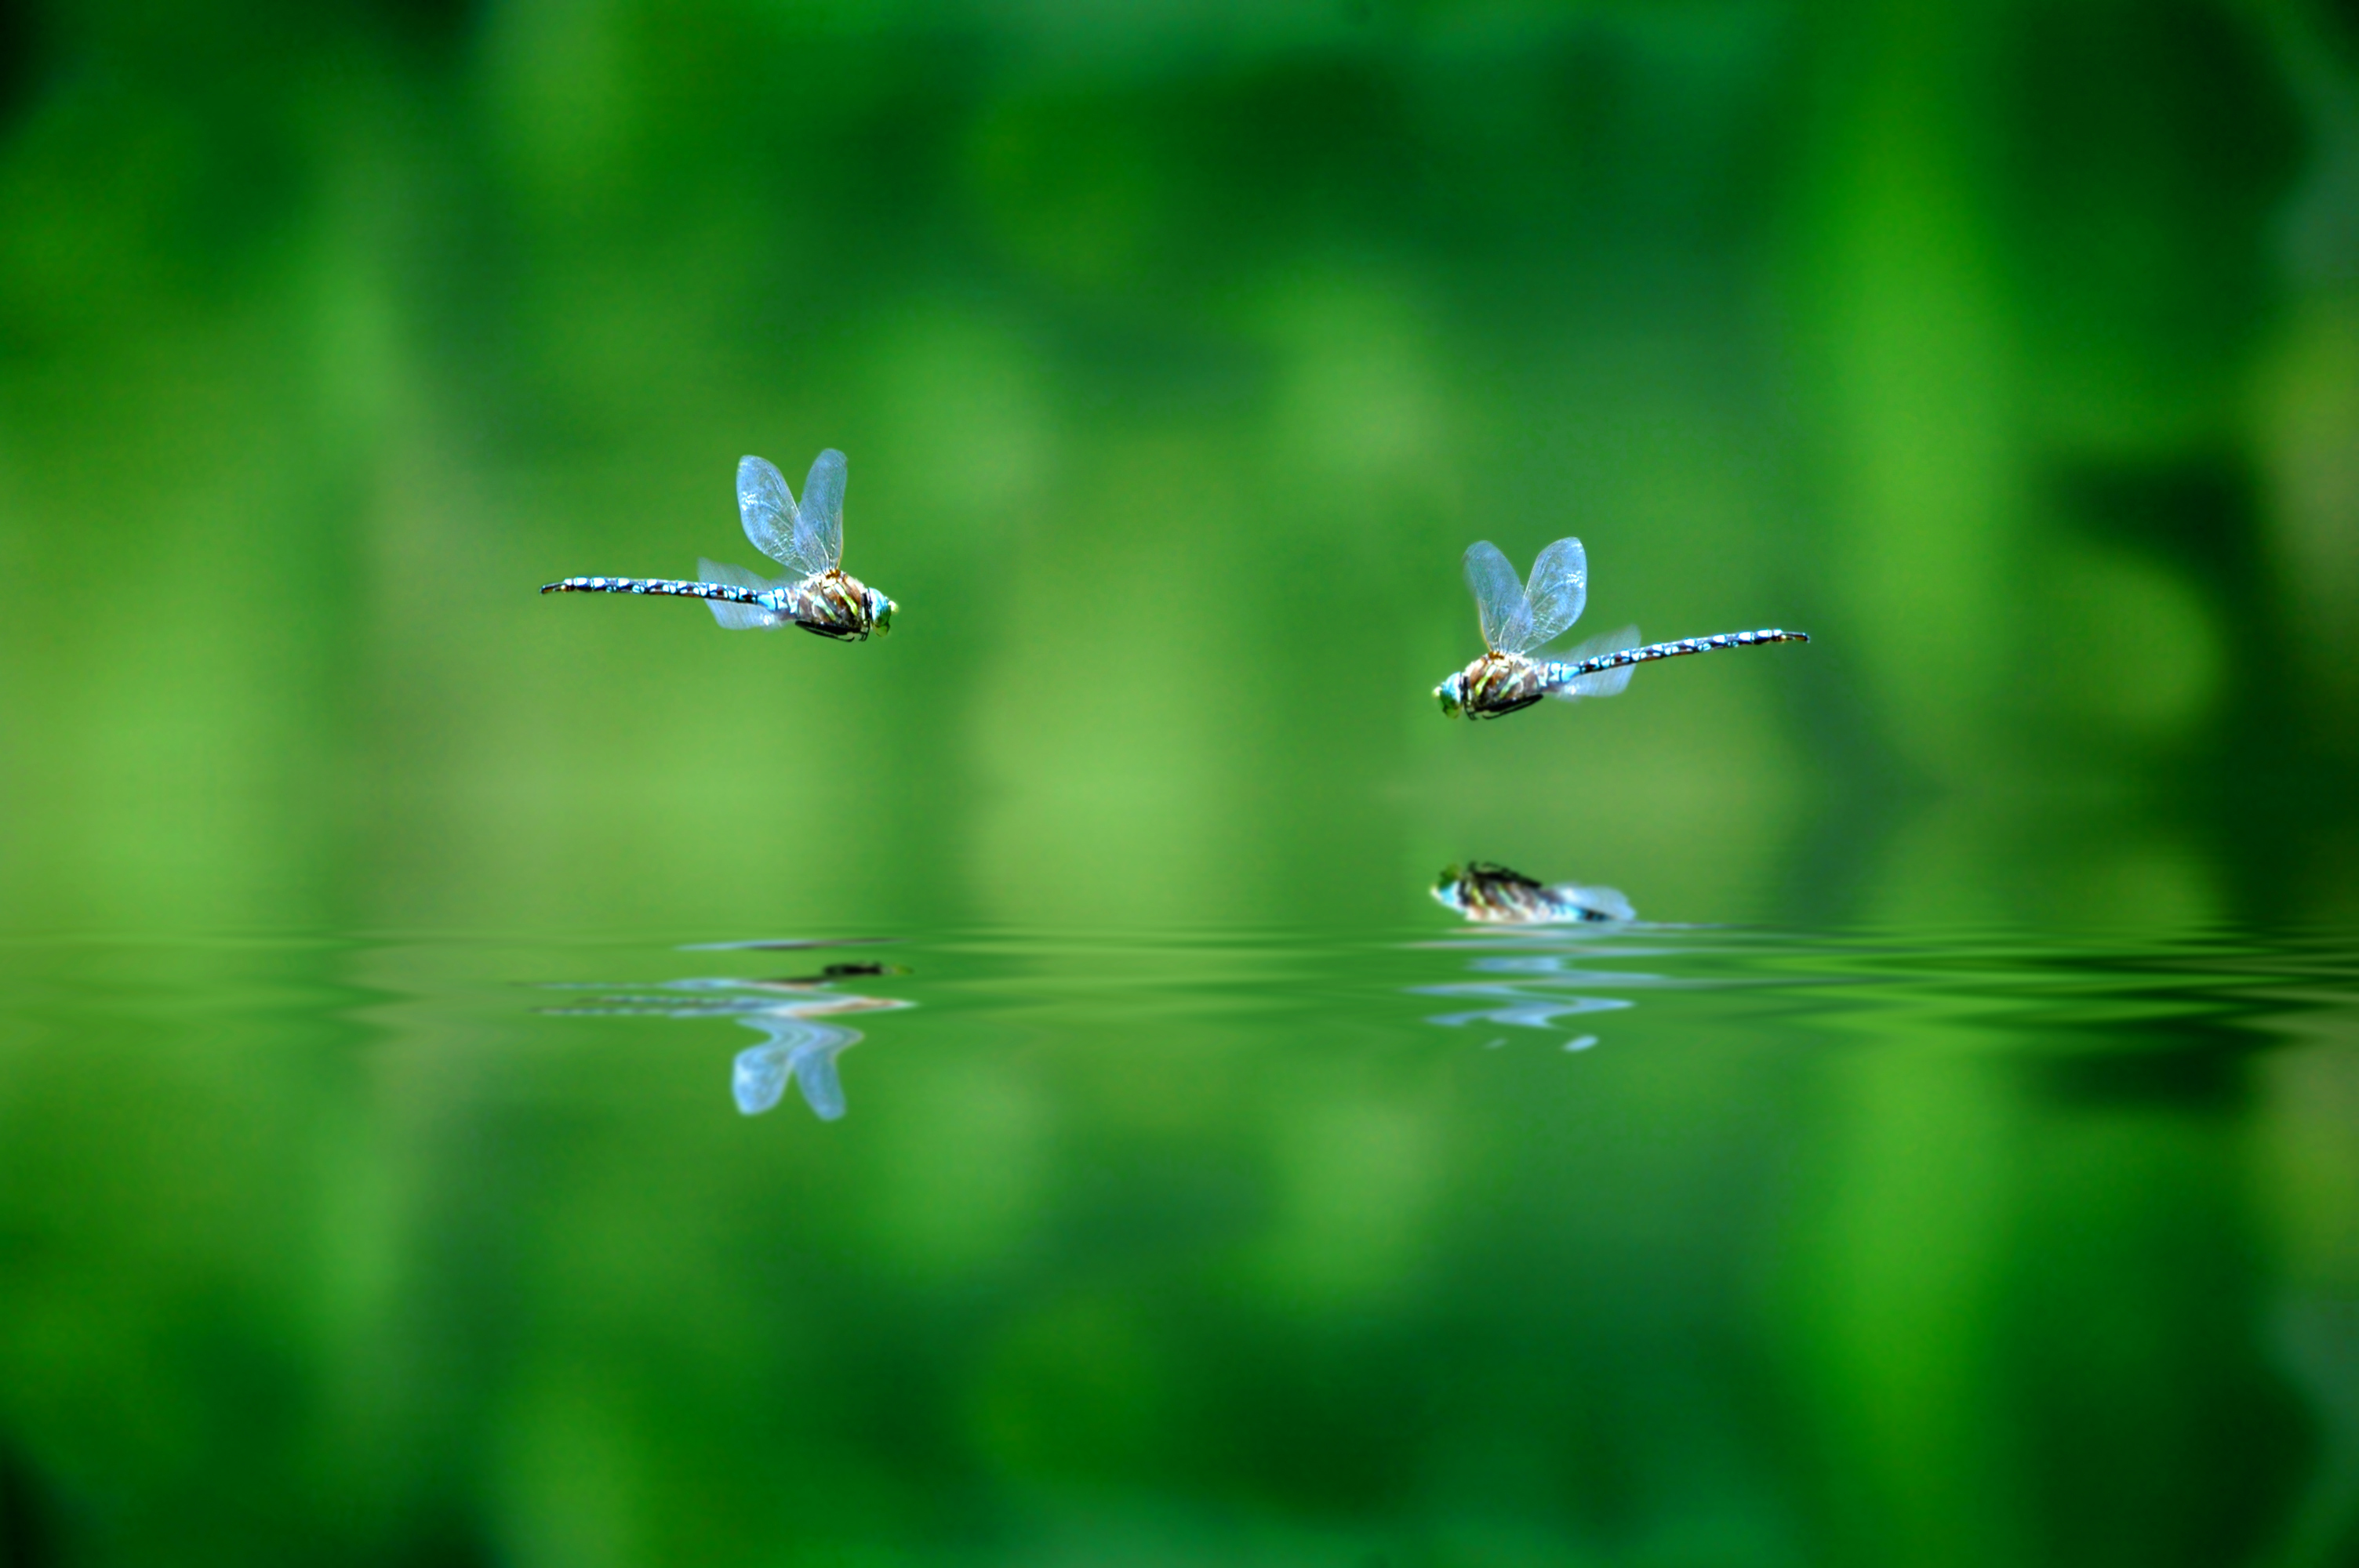 Bugs flying over water